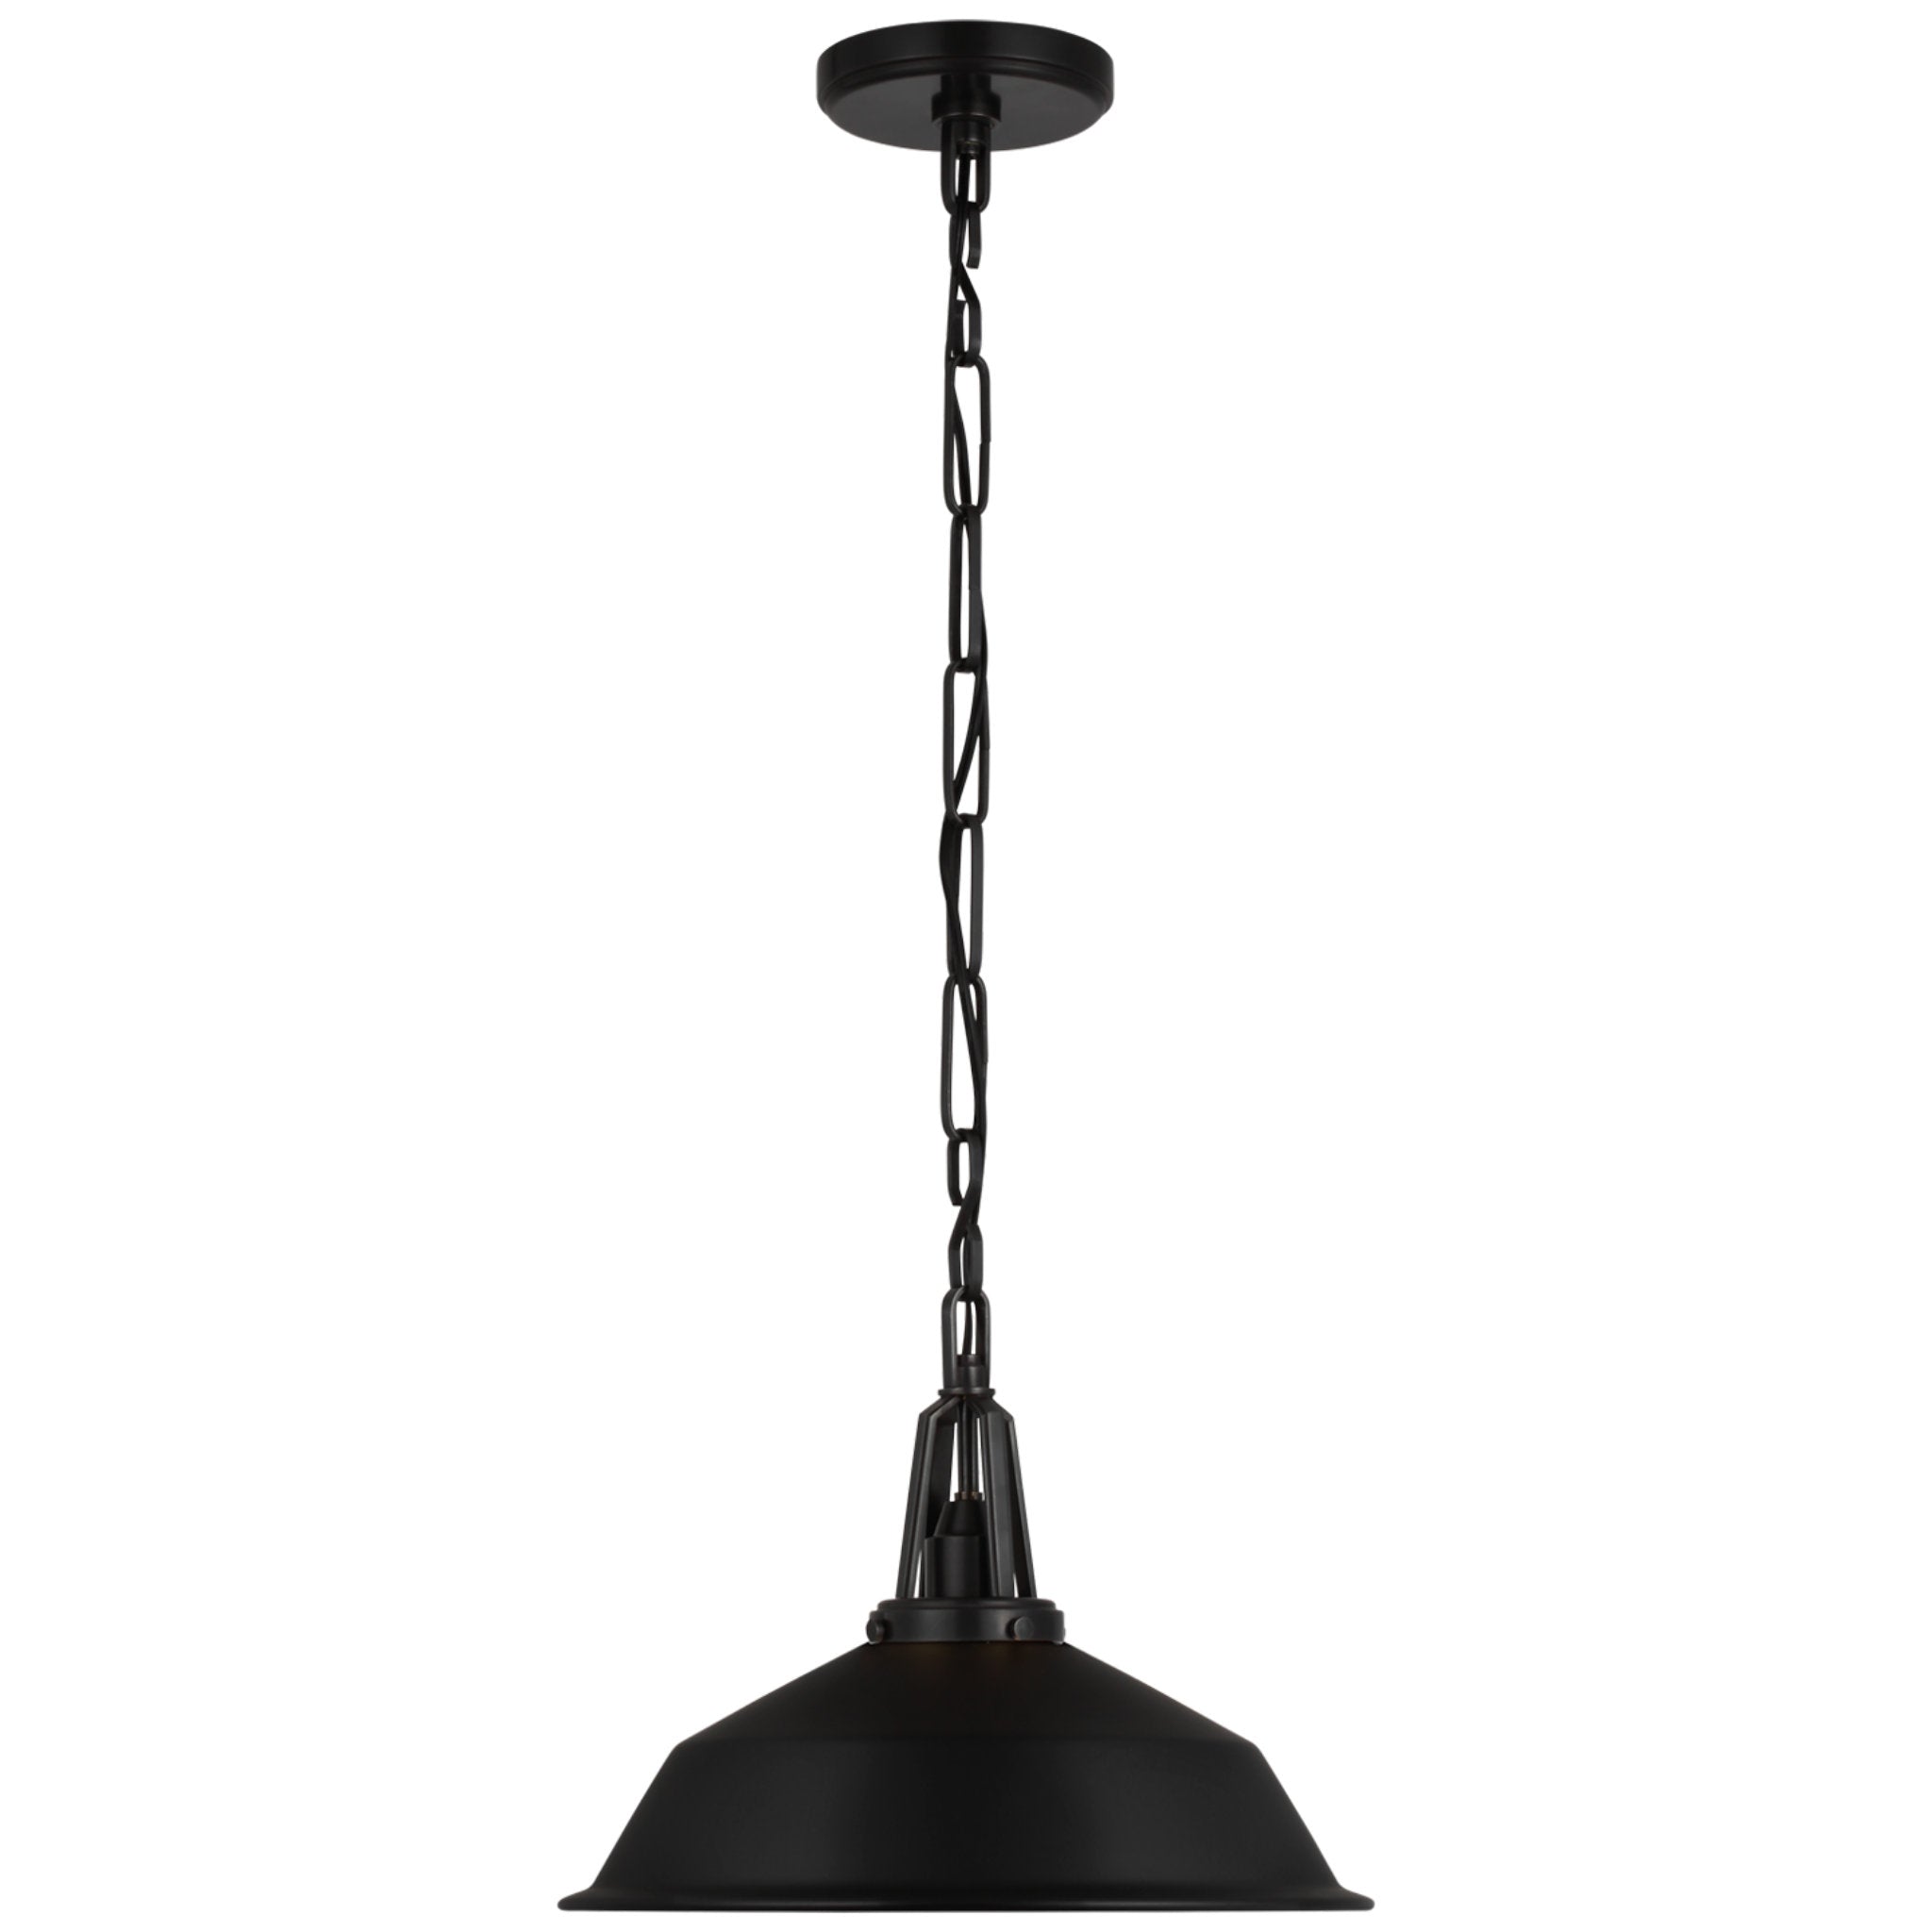 Chapman & Myers Layton 14" Pendant in Bronze with Matte Black Shade